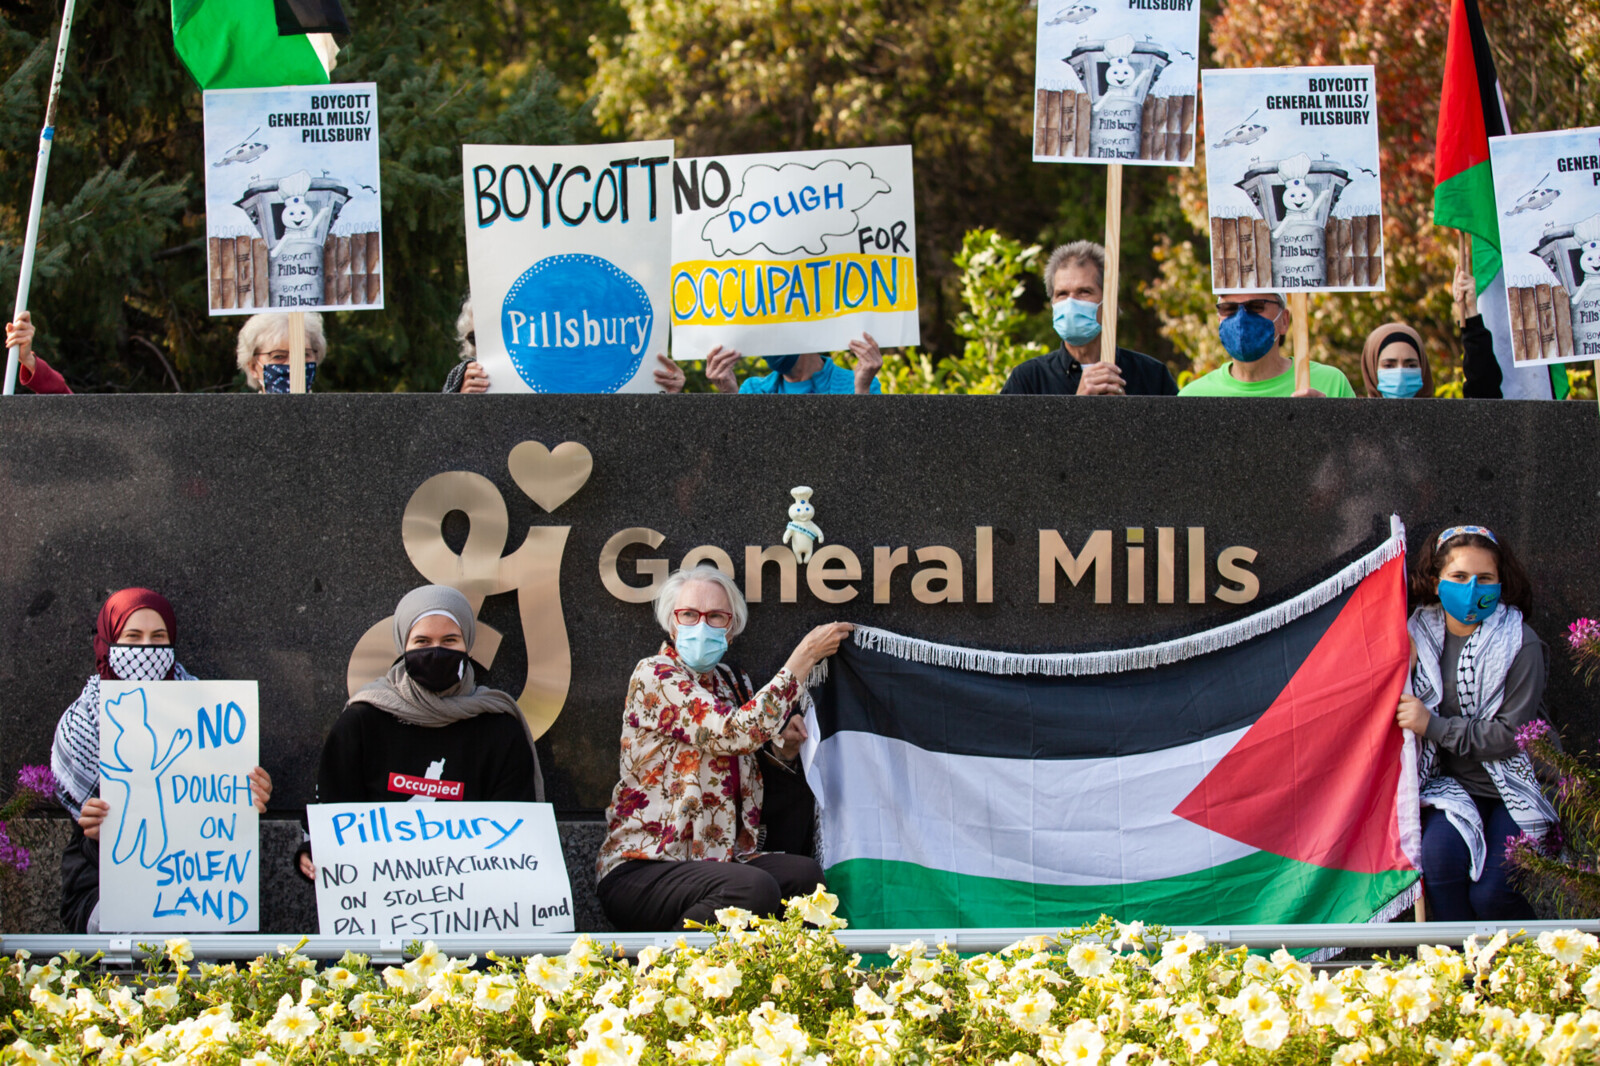 Holding General Mills accountable for profiting from the occupation